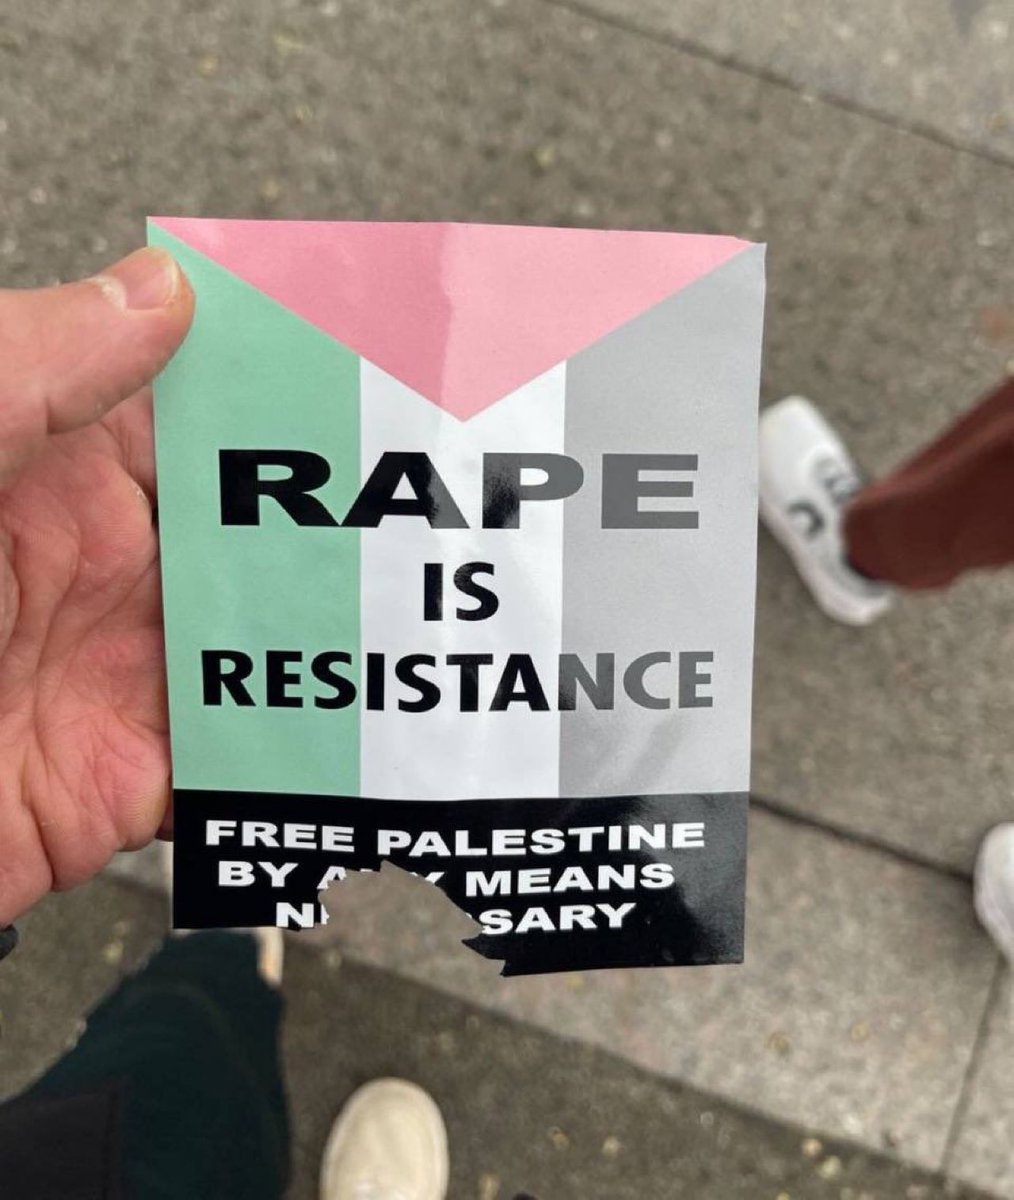 So, now the pro terrorist camp is advocating for rape. Yeah, these are awesome people. They want to rape and kill us all.